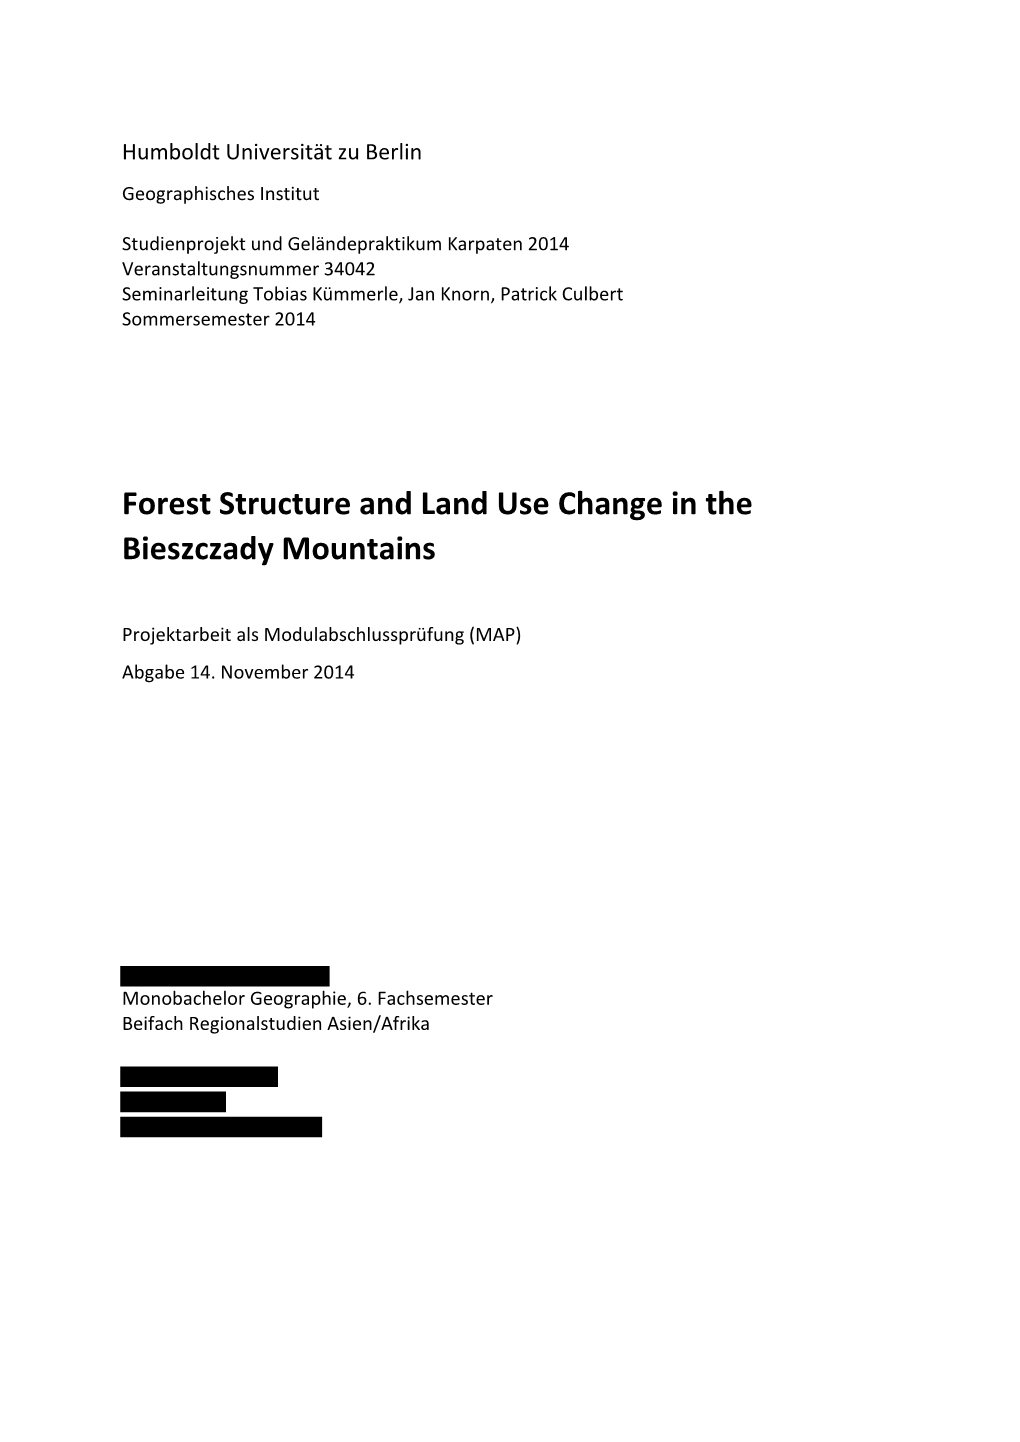 Forest Structure and Land Use Change in the Bieszczady Mountains